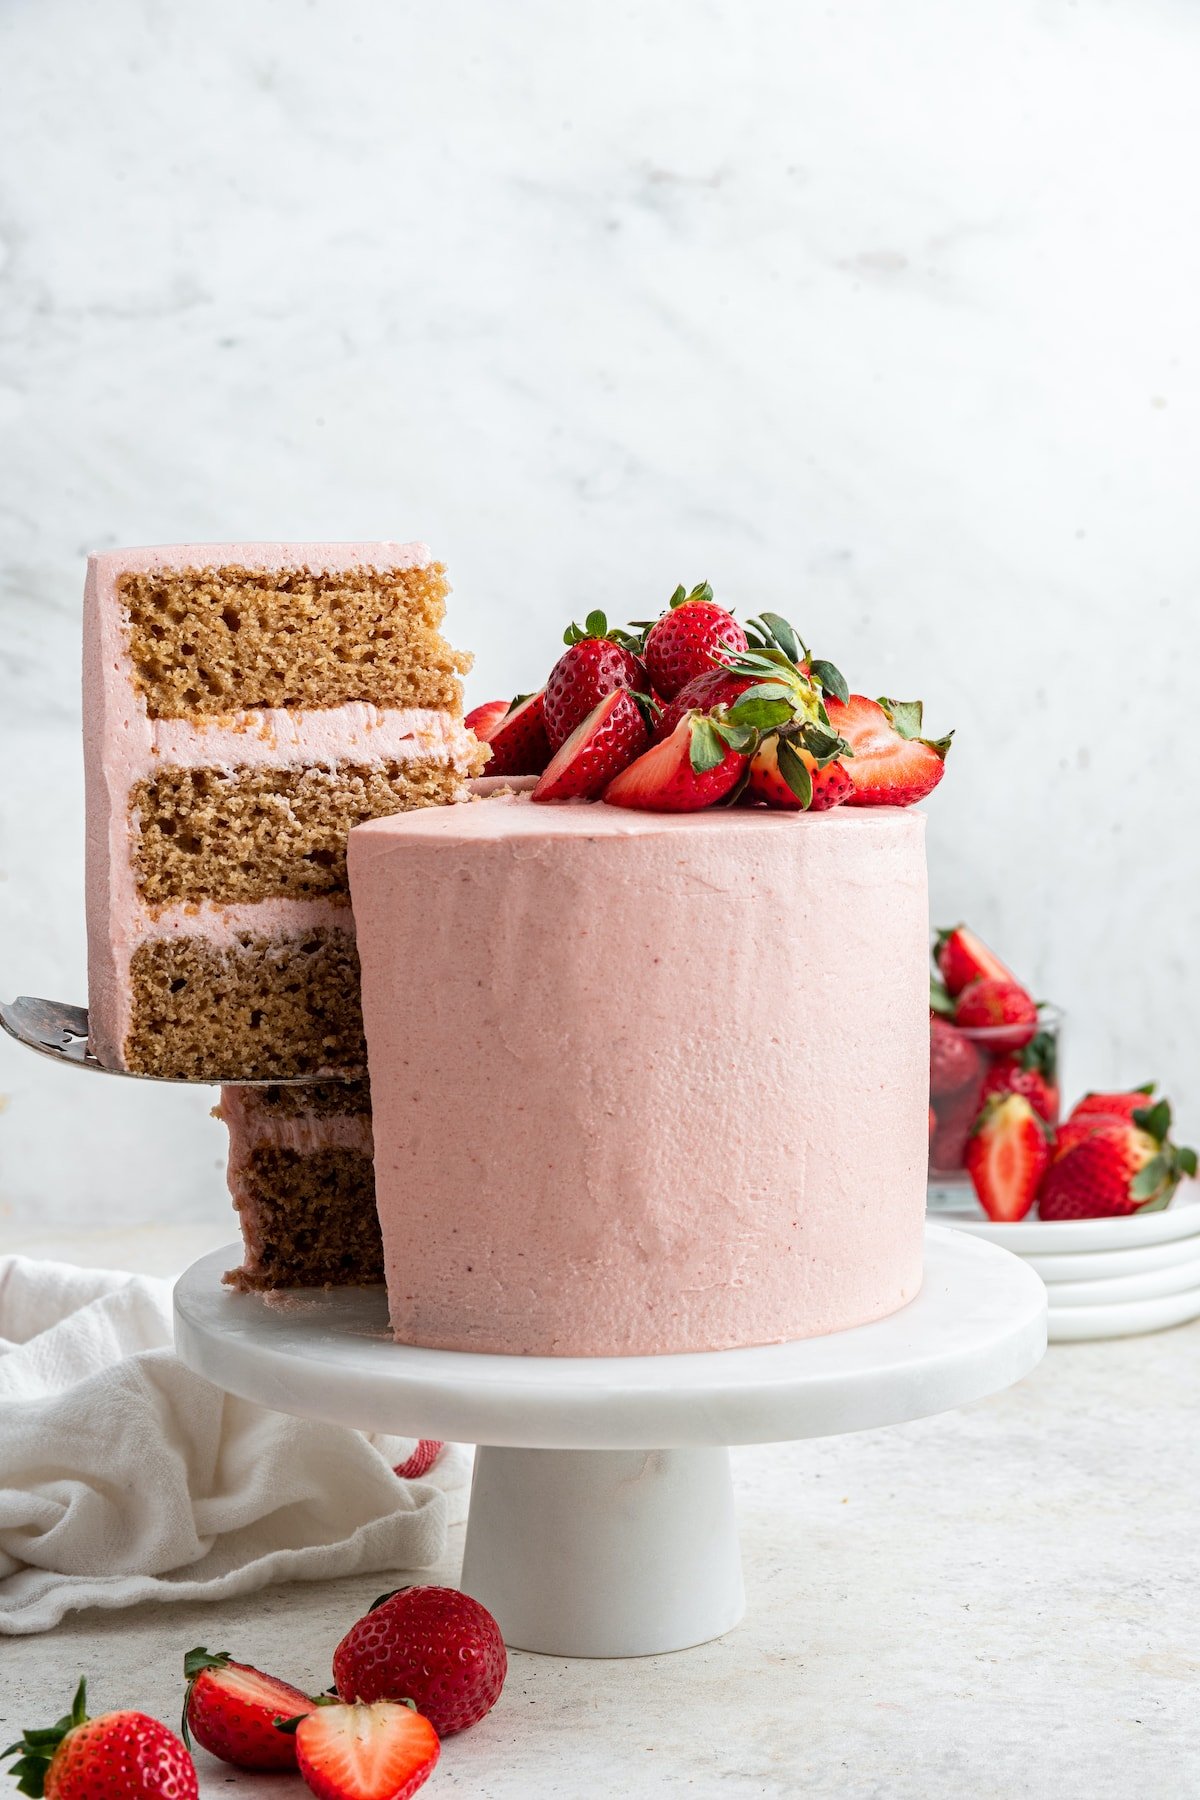 A slice of strawberry cake is being served off a small pedestal where the cake stands. The cake is covered in pink frosting and topped with fresh strawberries.